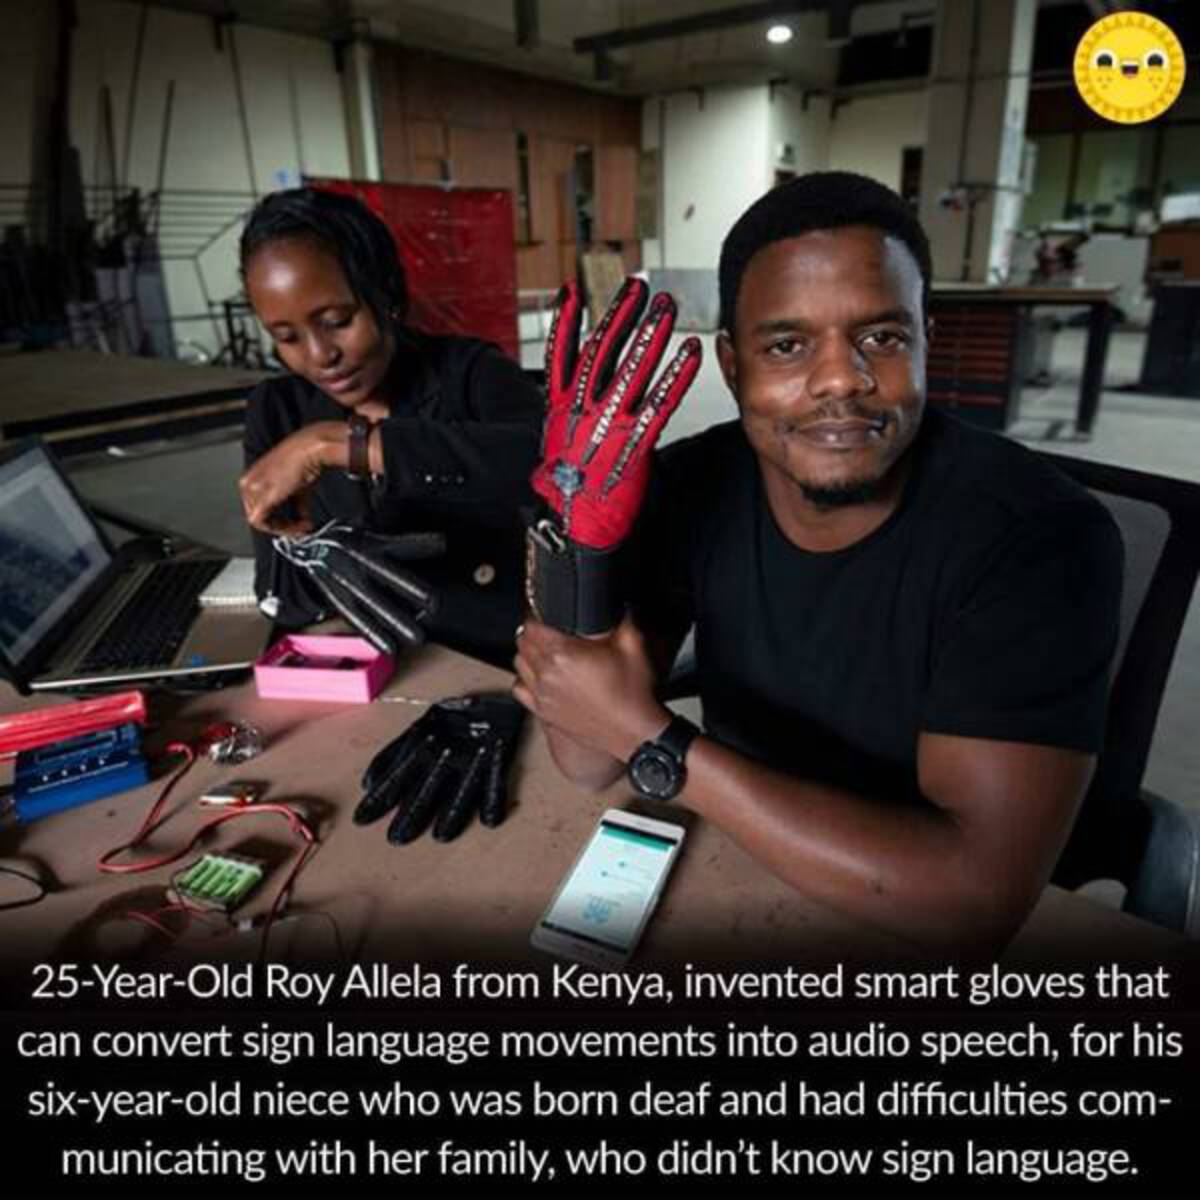 kenyan inventor - Shawezi'N Mevs Mada 25YearOld Roy Allela from Kenya, invented smart gloves that can convert sign language movements into audio speech, for his sixyearold niece who was born deaf and had difficulties com municating with her family, who di